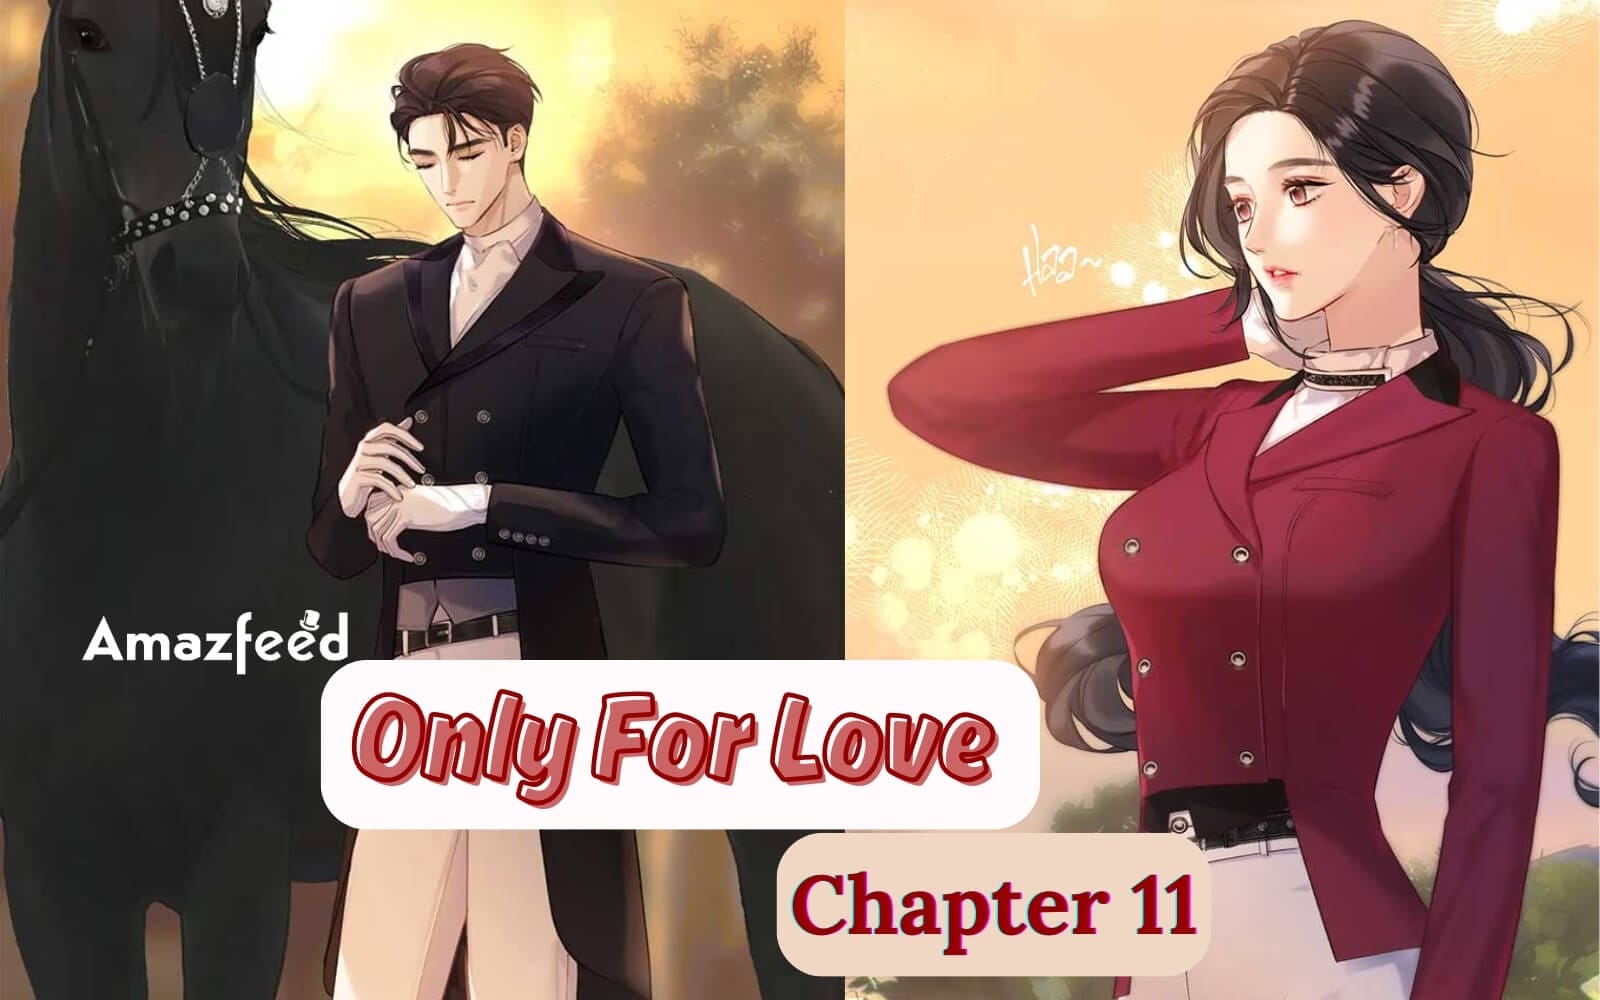 Only For Love Chapter 11 Release Date, Spoiler